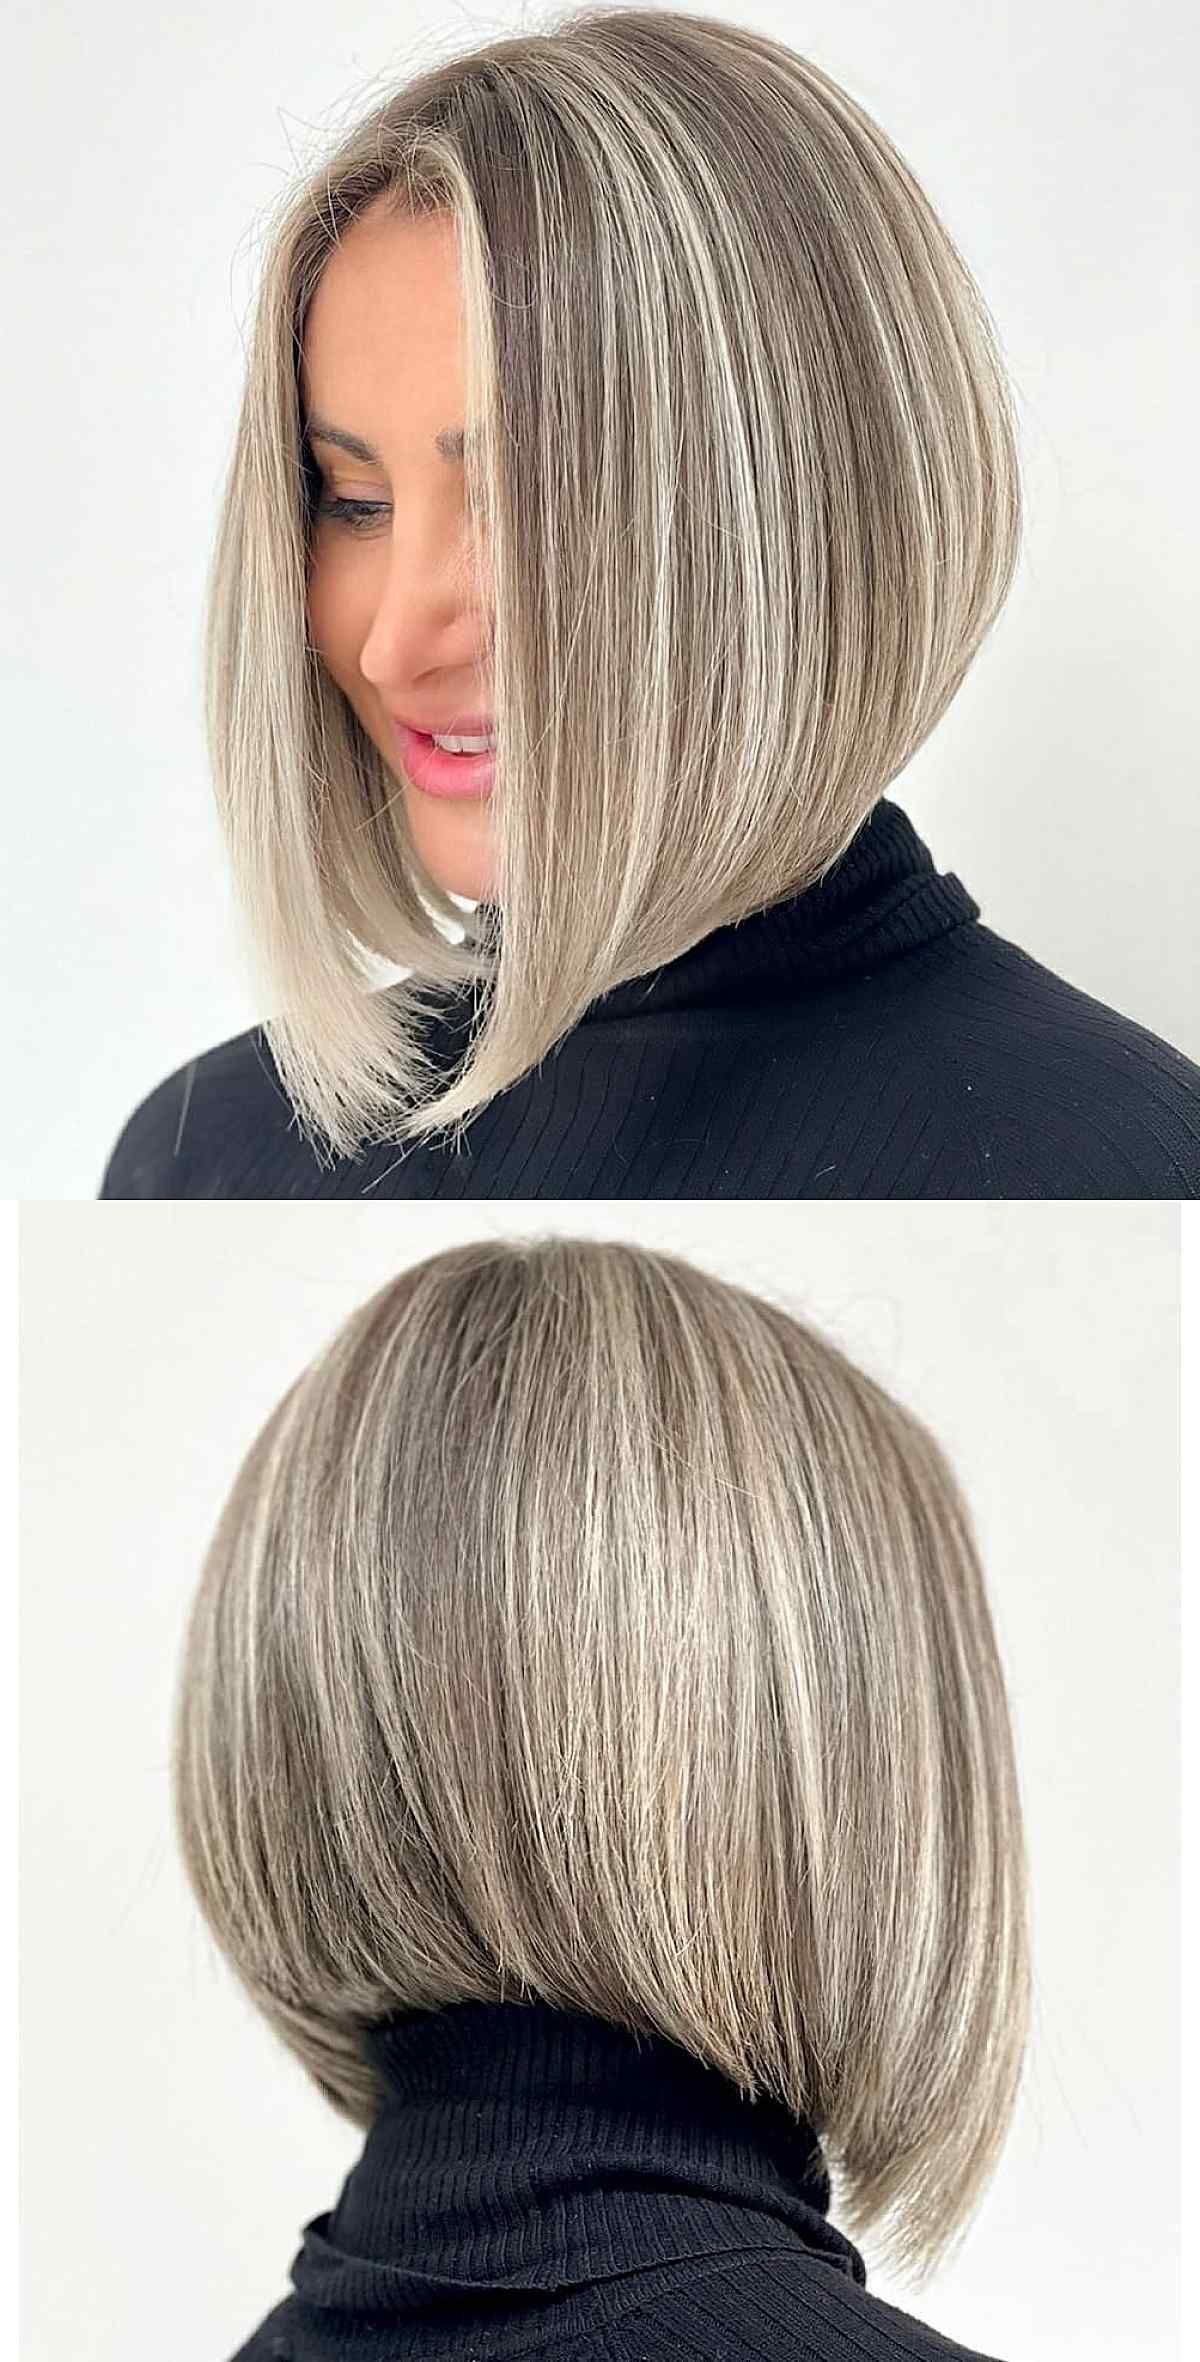 34 Hottest A Line Bob Haircuts You'll Want To Try In 2022 Regarding 2018 A Line Lob Haircuts (View 11 of 25)